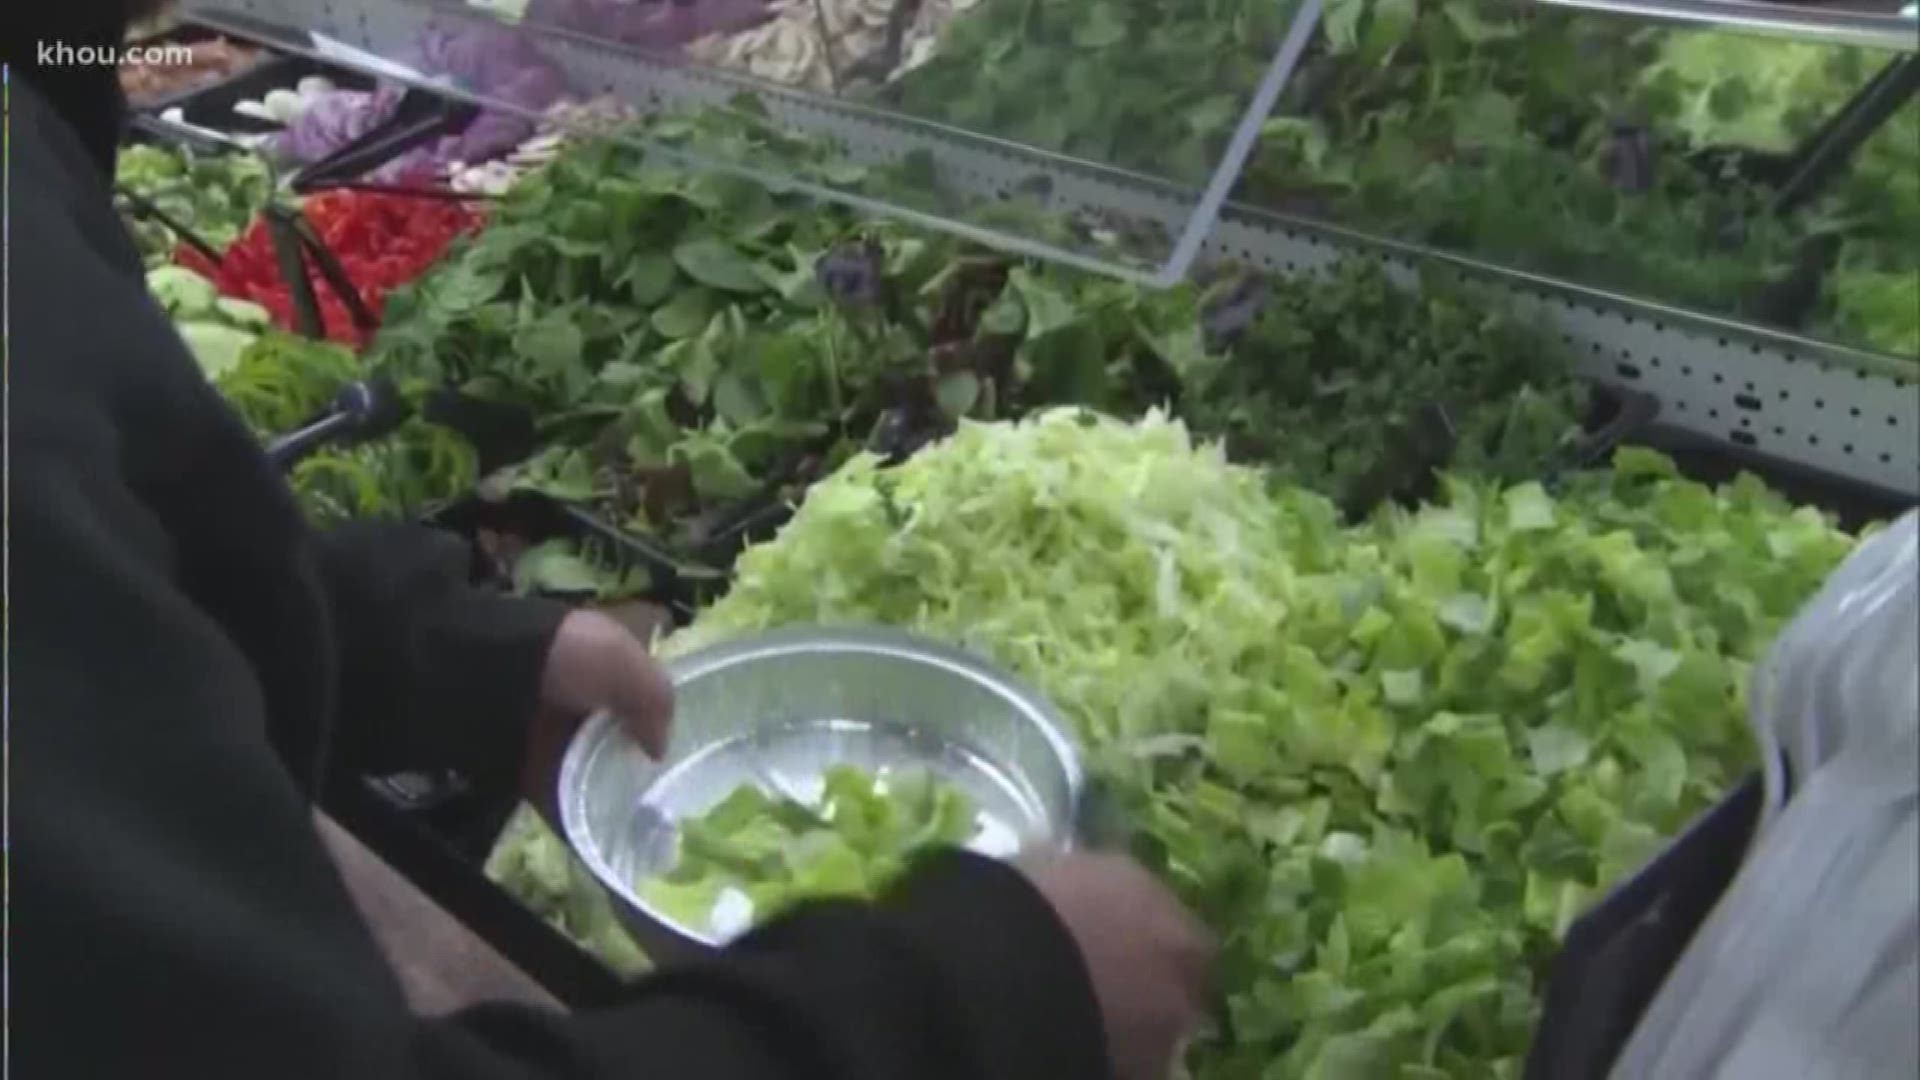 The FDA says you can start eating romaine lettuce again, but check the label first!